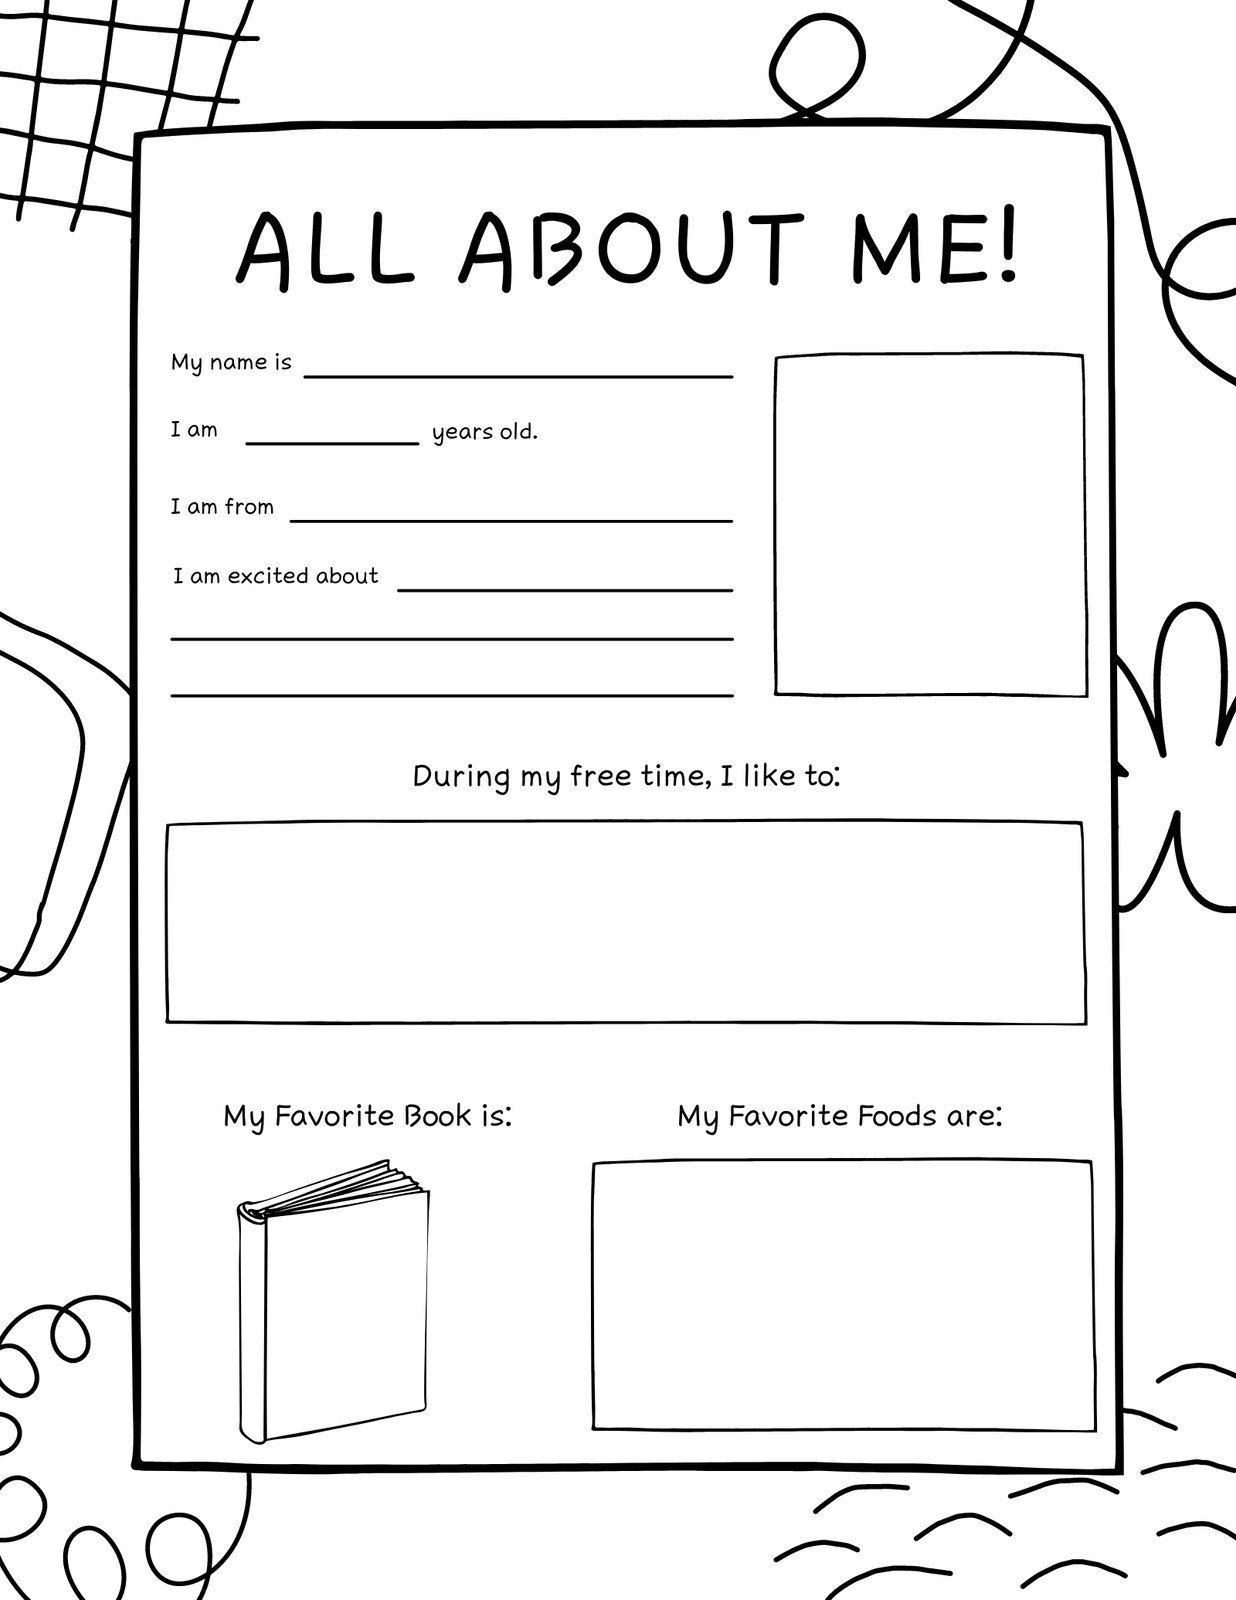 worksheet-all-about-me-template-gettrip-sexiezpicz-web-porn